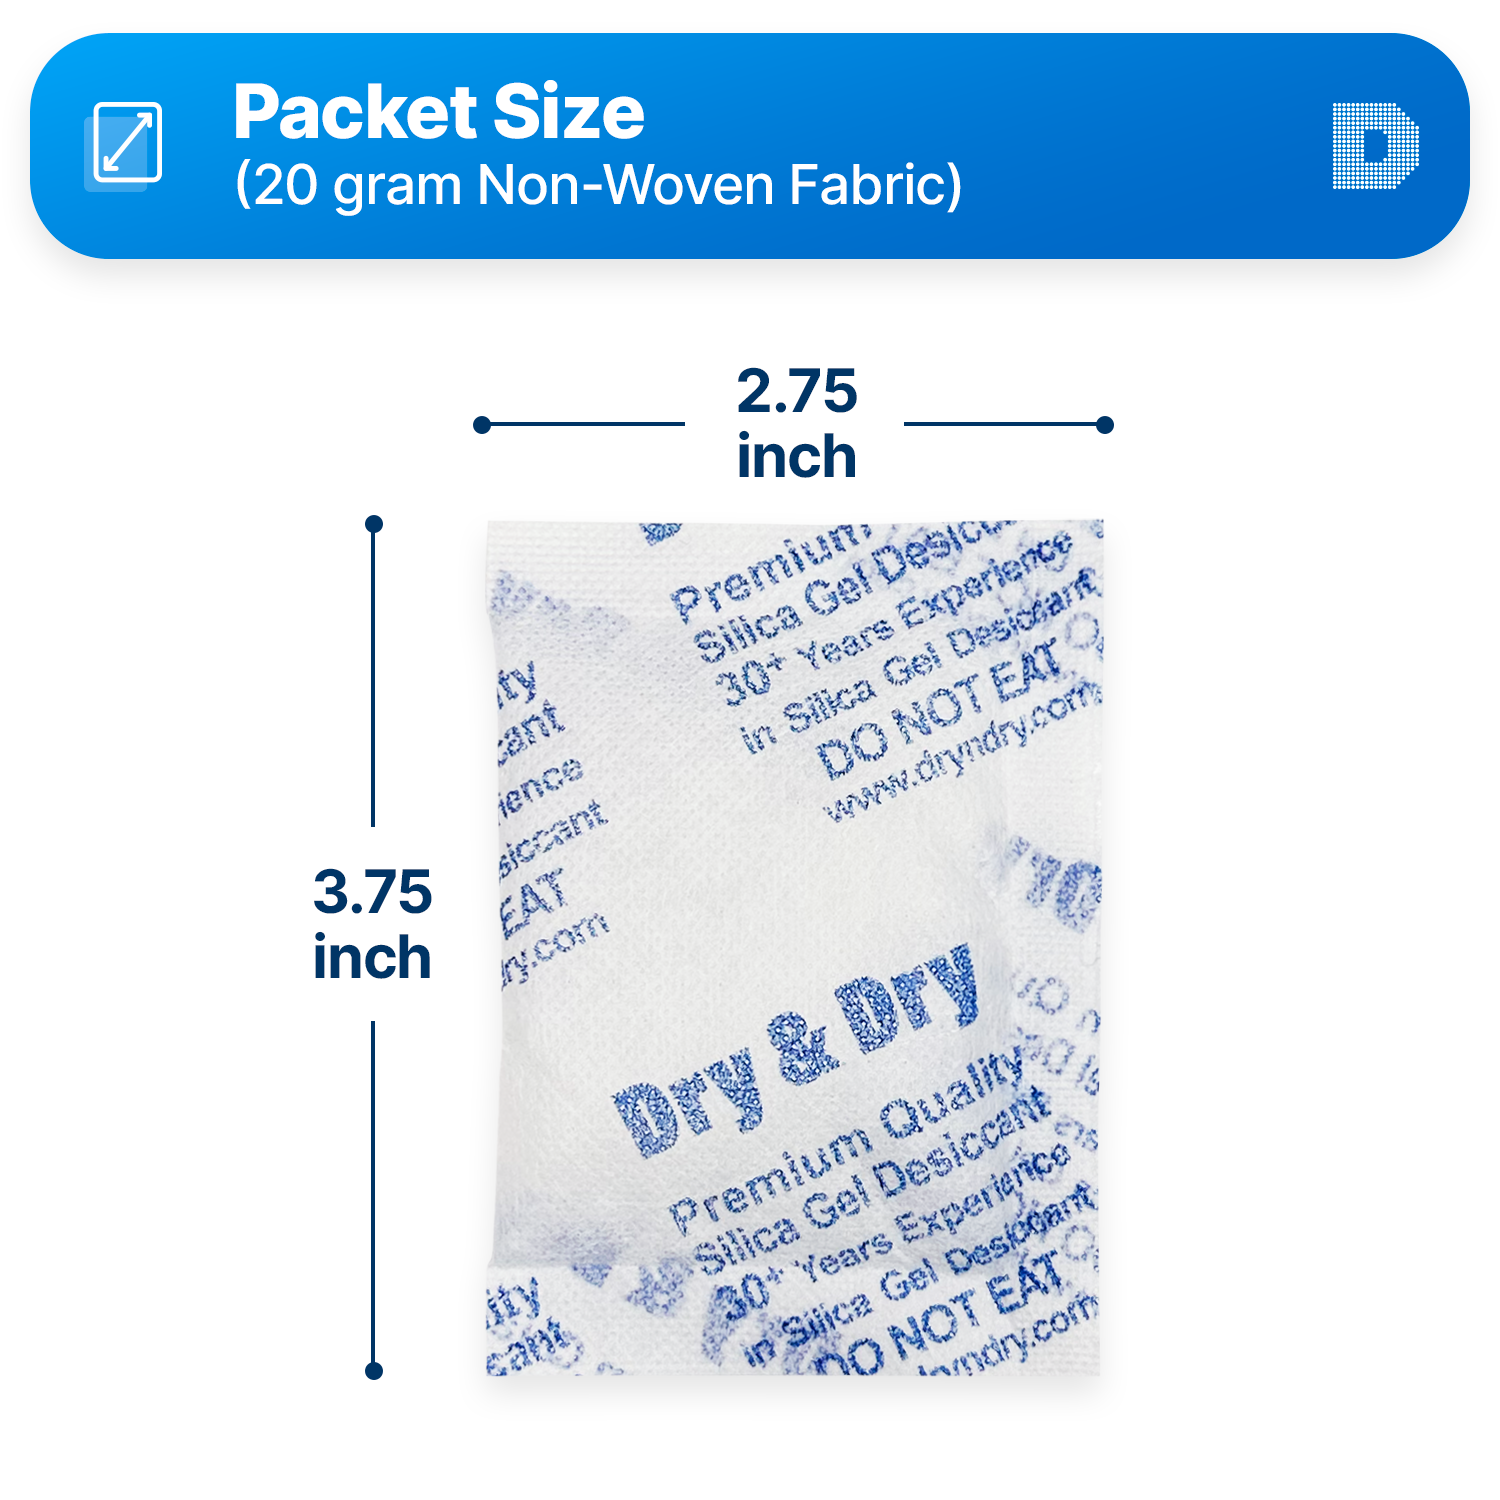 20 Gram Non-Woven Fabric(Cloth) Packets